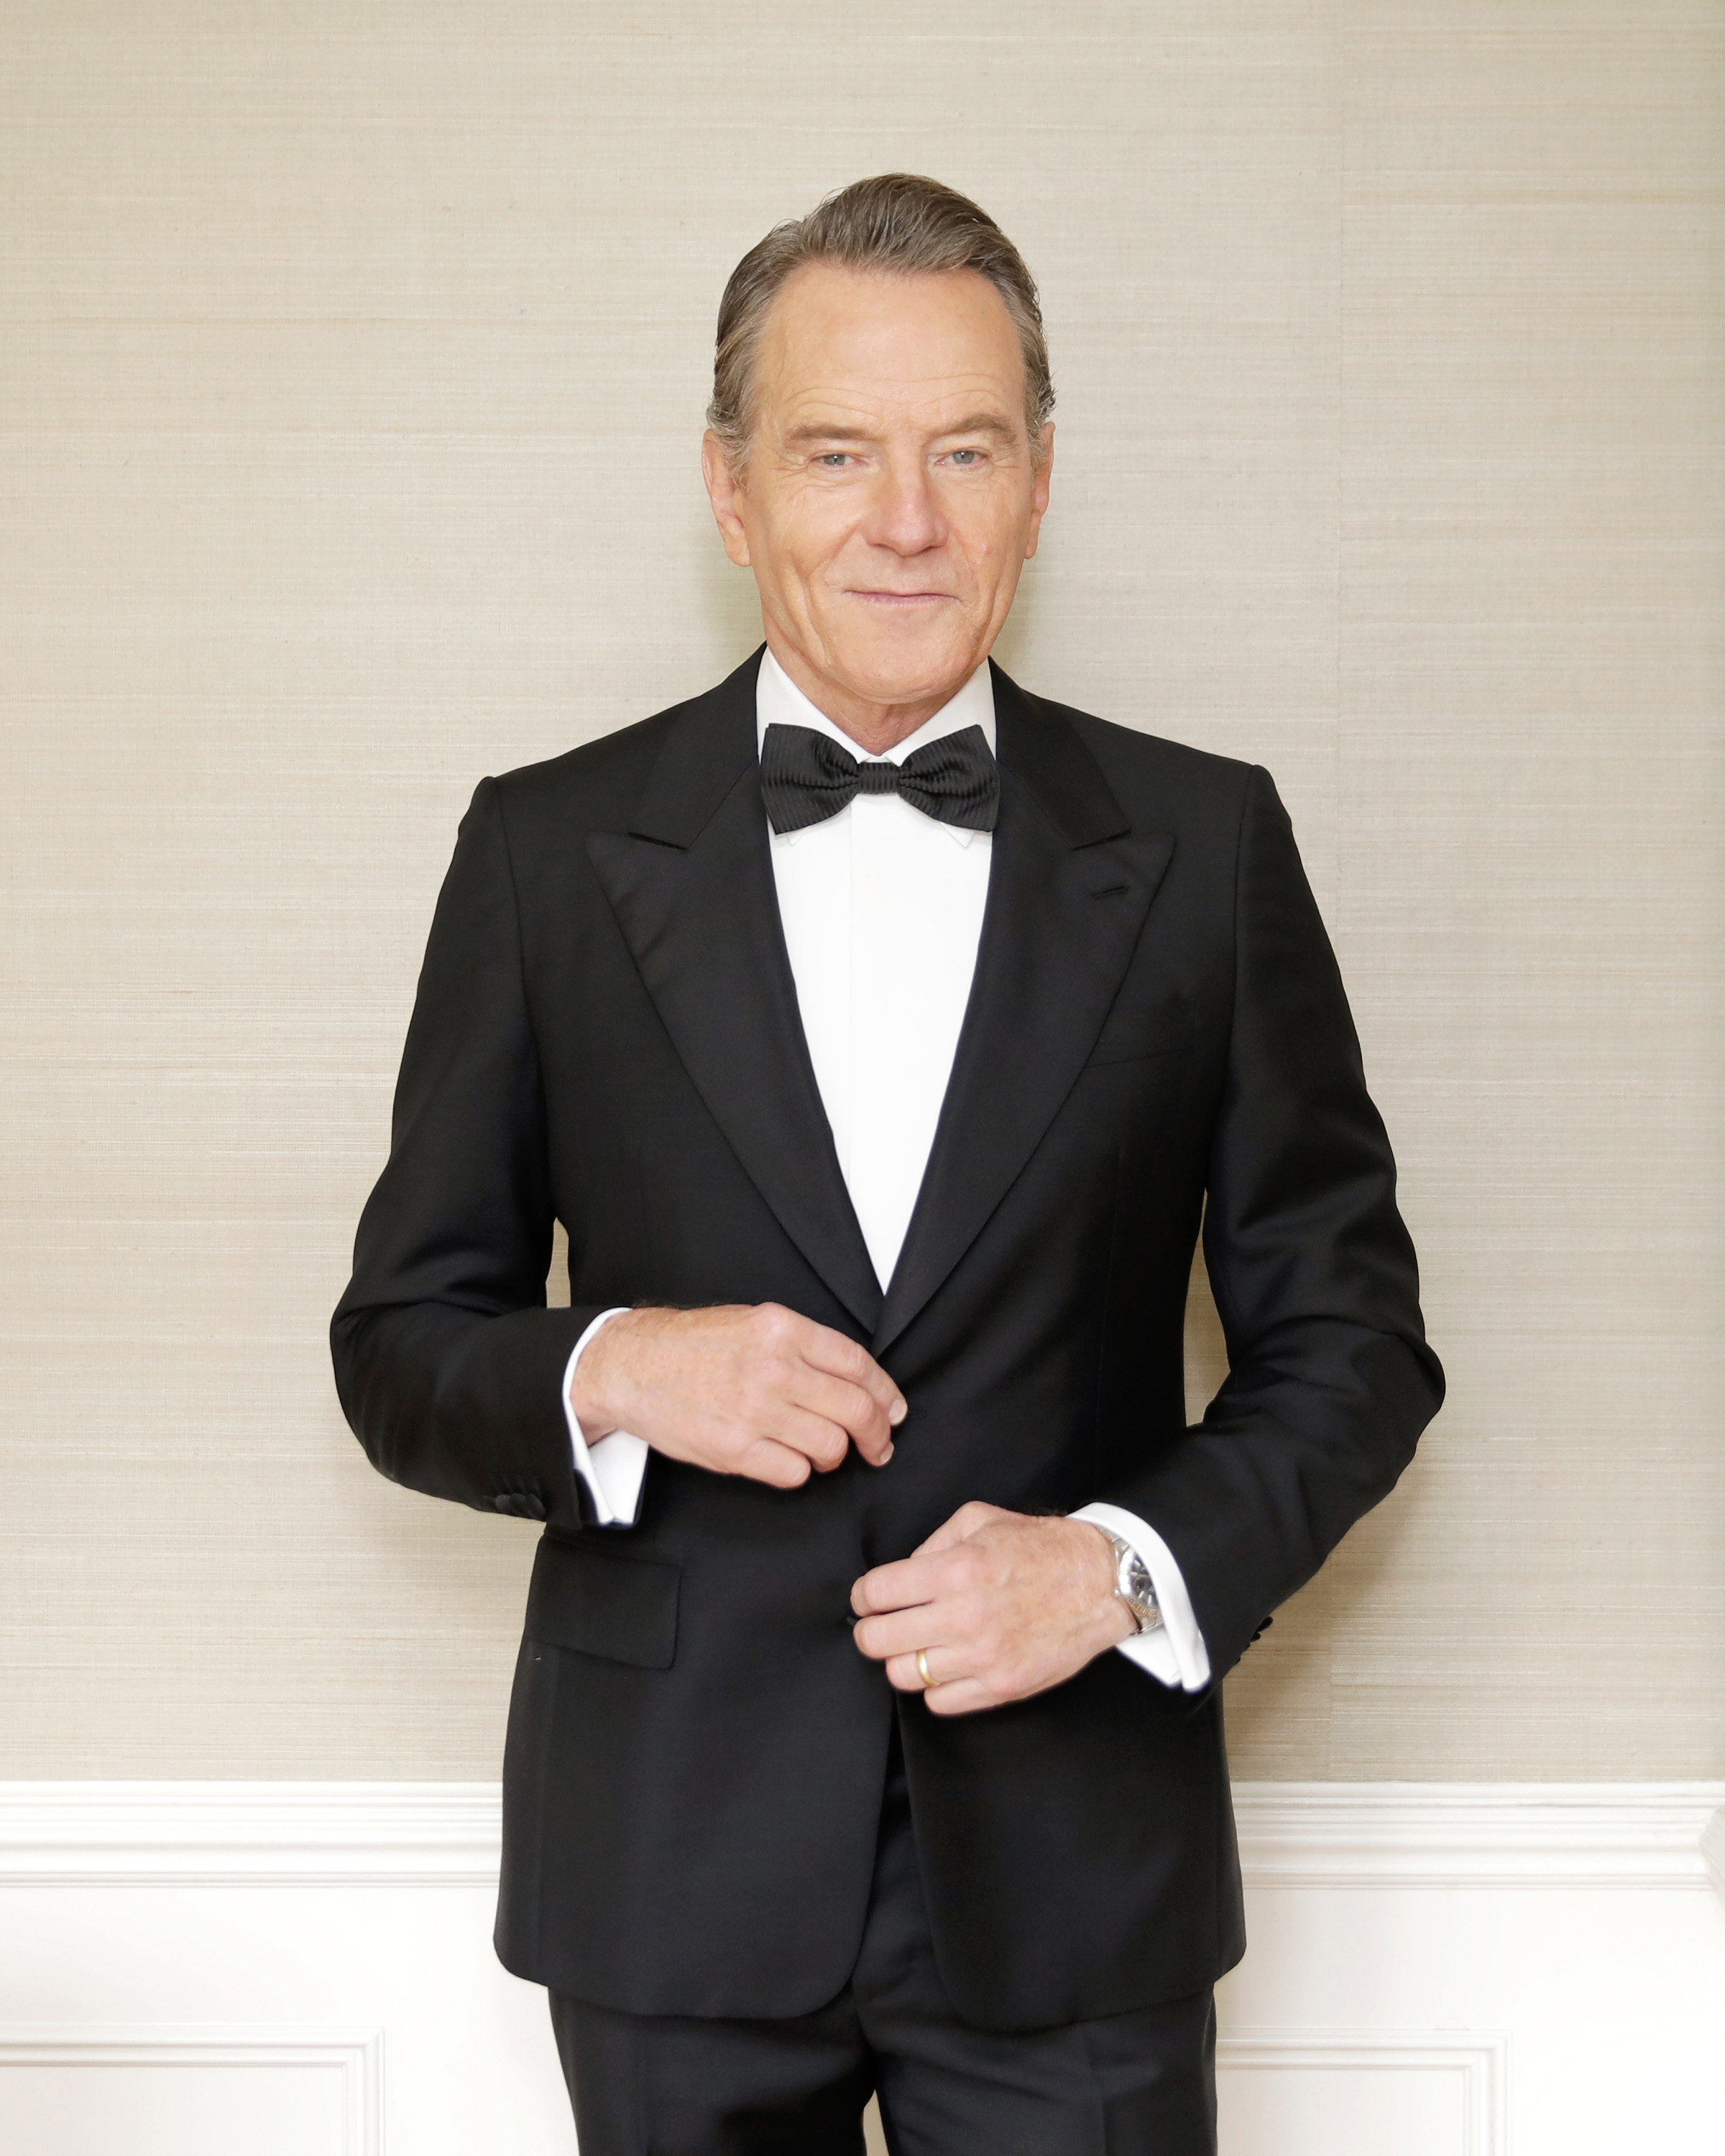 Bryan Cranston poses in front of a wall, wearing a buttoned-up tuxedo